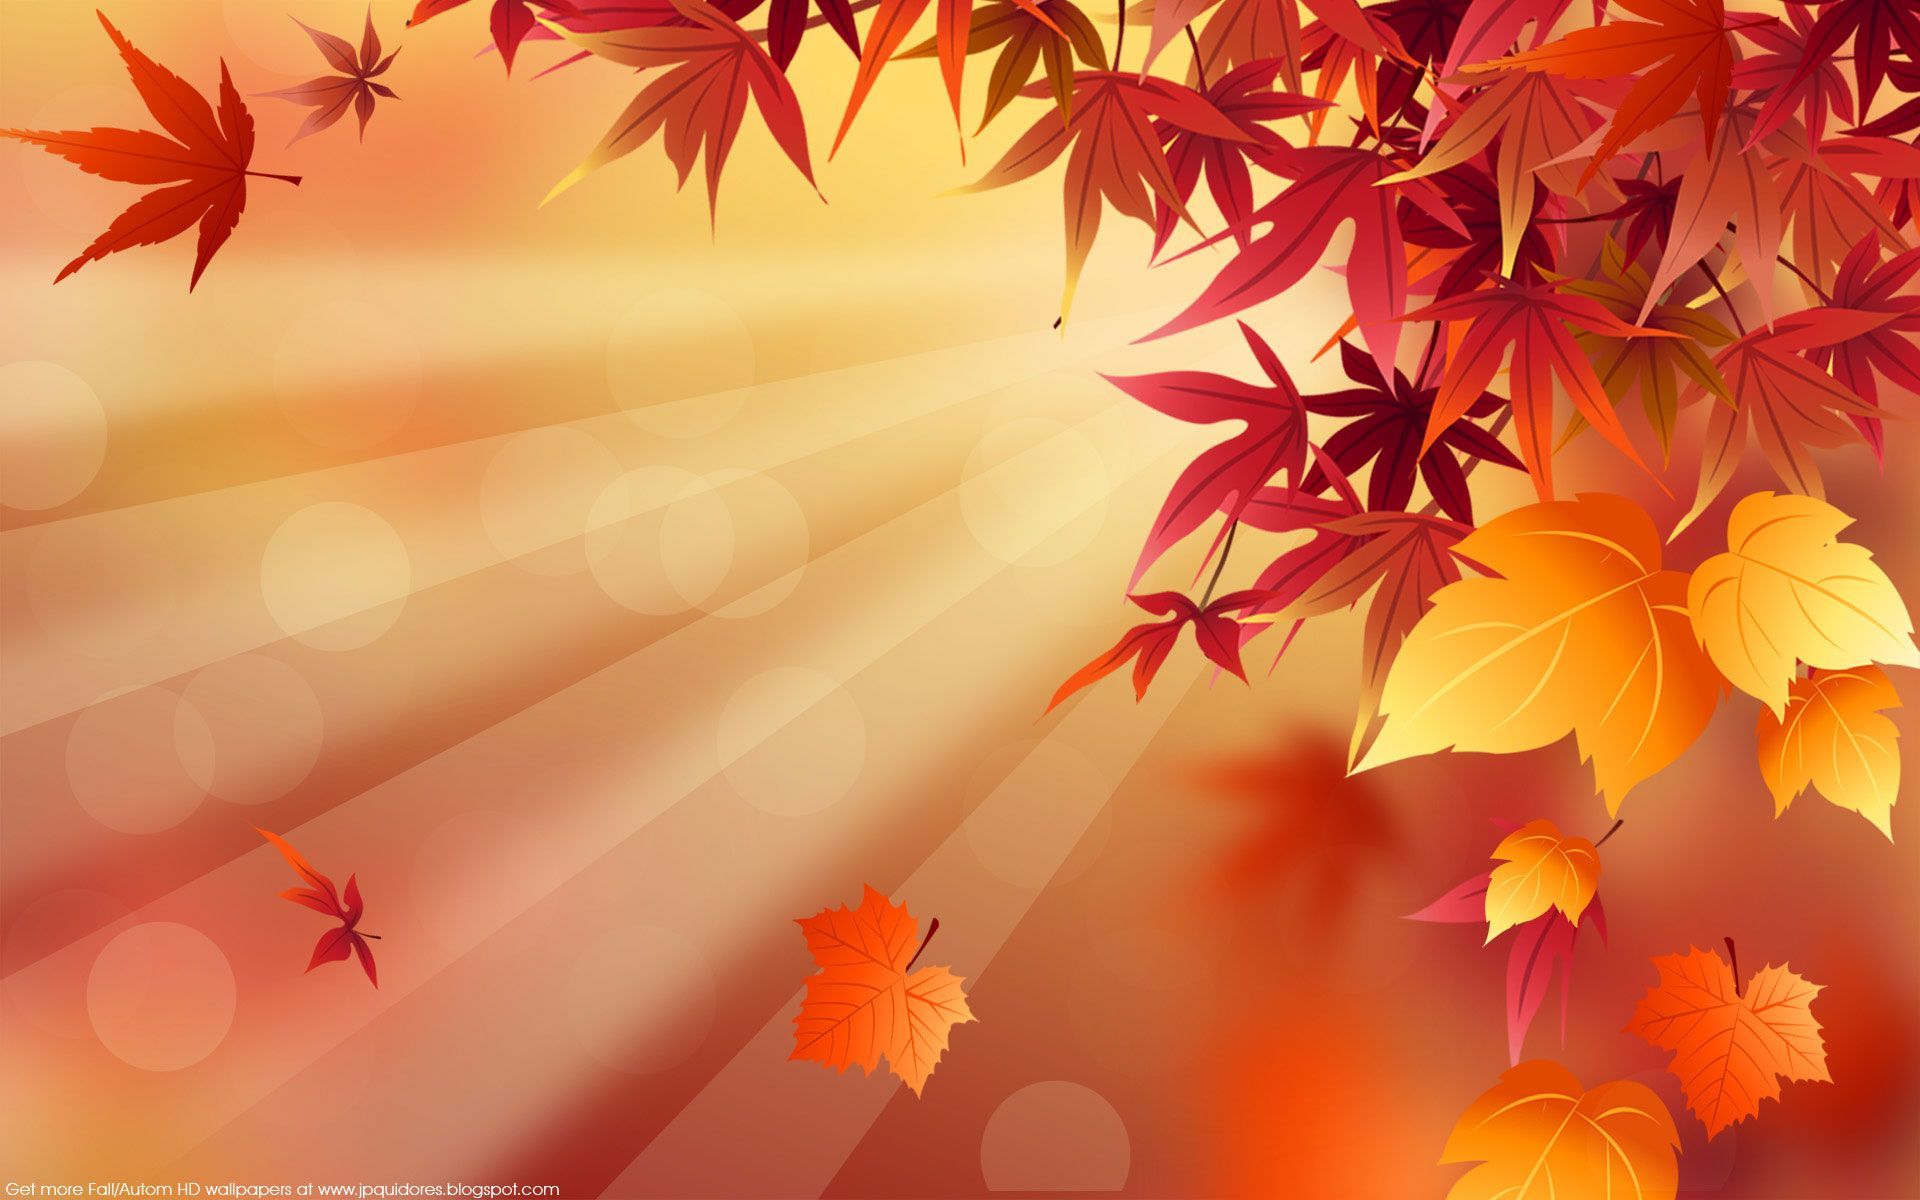 Autumn Fall Leaves Hd Wallpaper Download Free Fall Leaves Hd Nature Landscape Picture Autumn Wallp. Free Fall Wallpaper, Fall Wallpaper, Fall Desktop Background